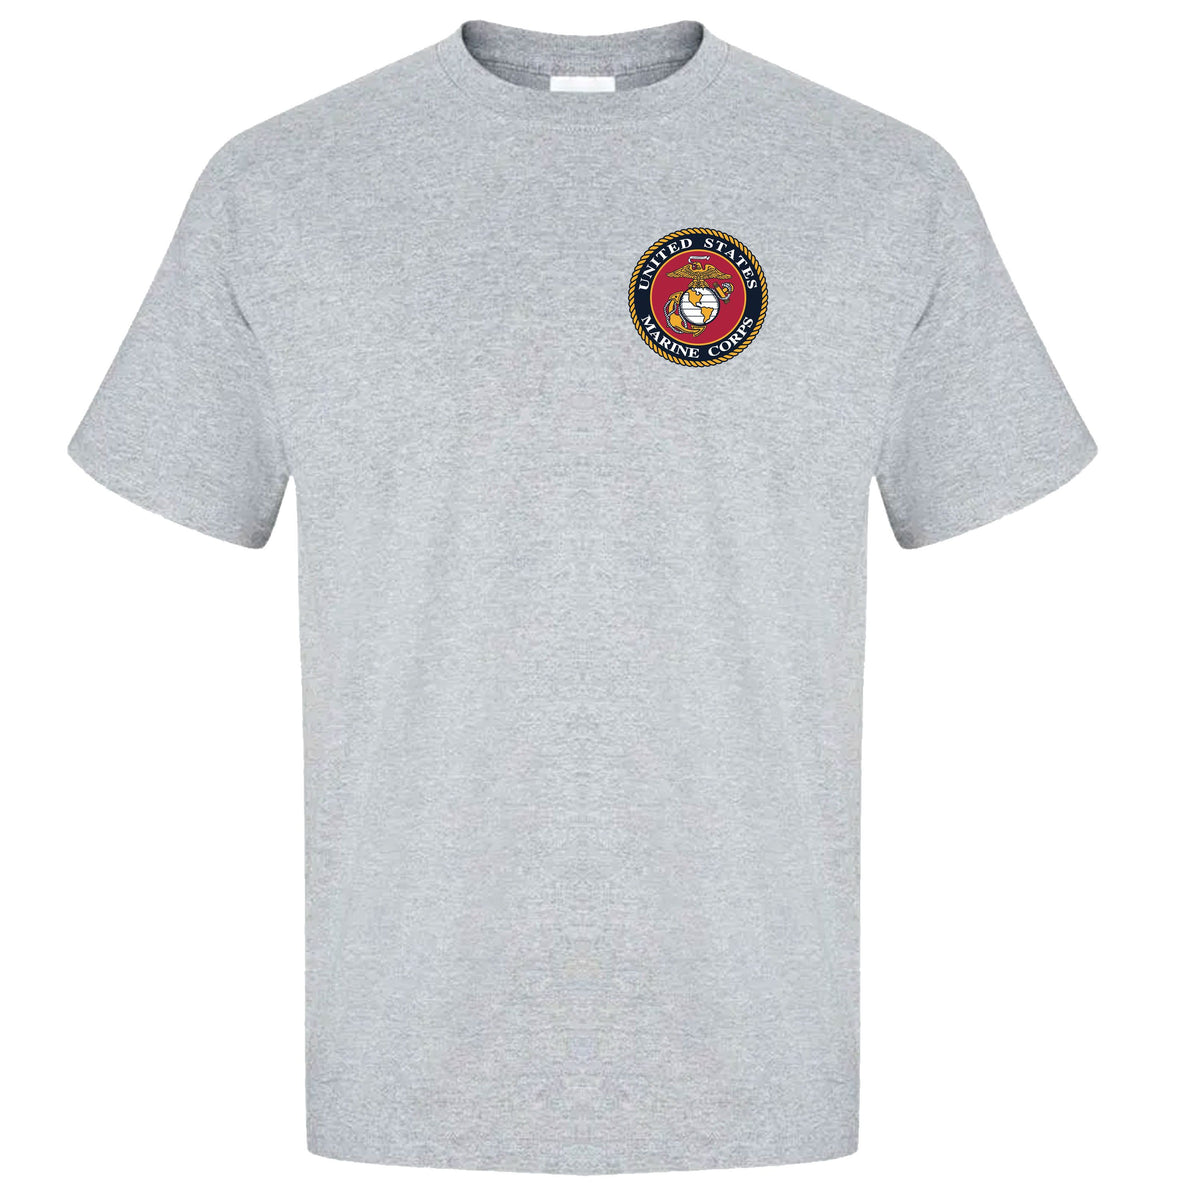 CLOSEOUT Marines Seal Chest Seal Sport Grey T-Shirt - Marine Corps Direct